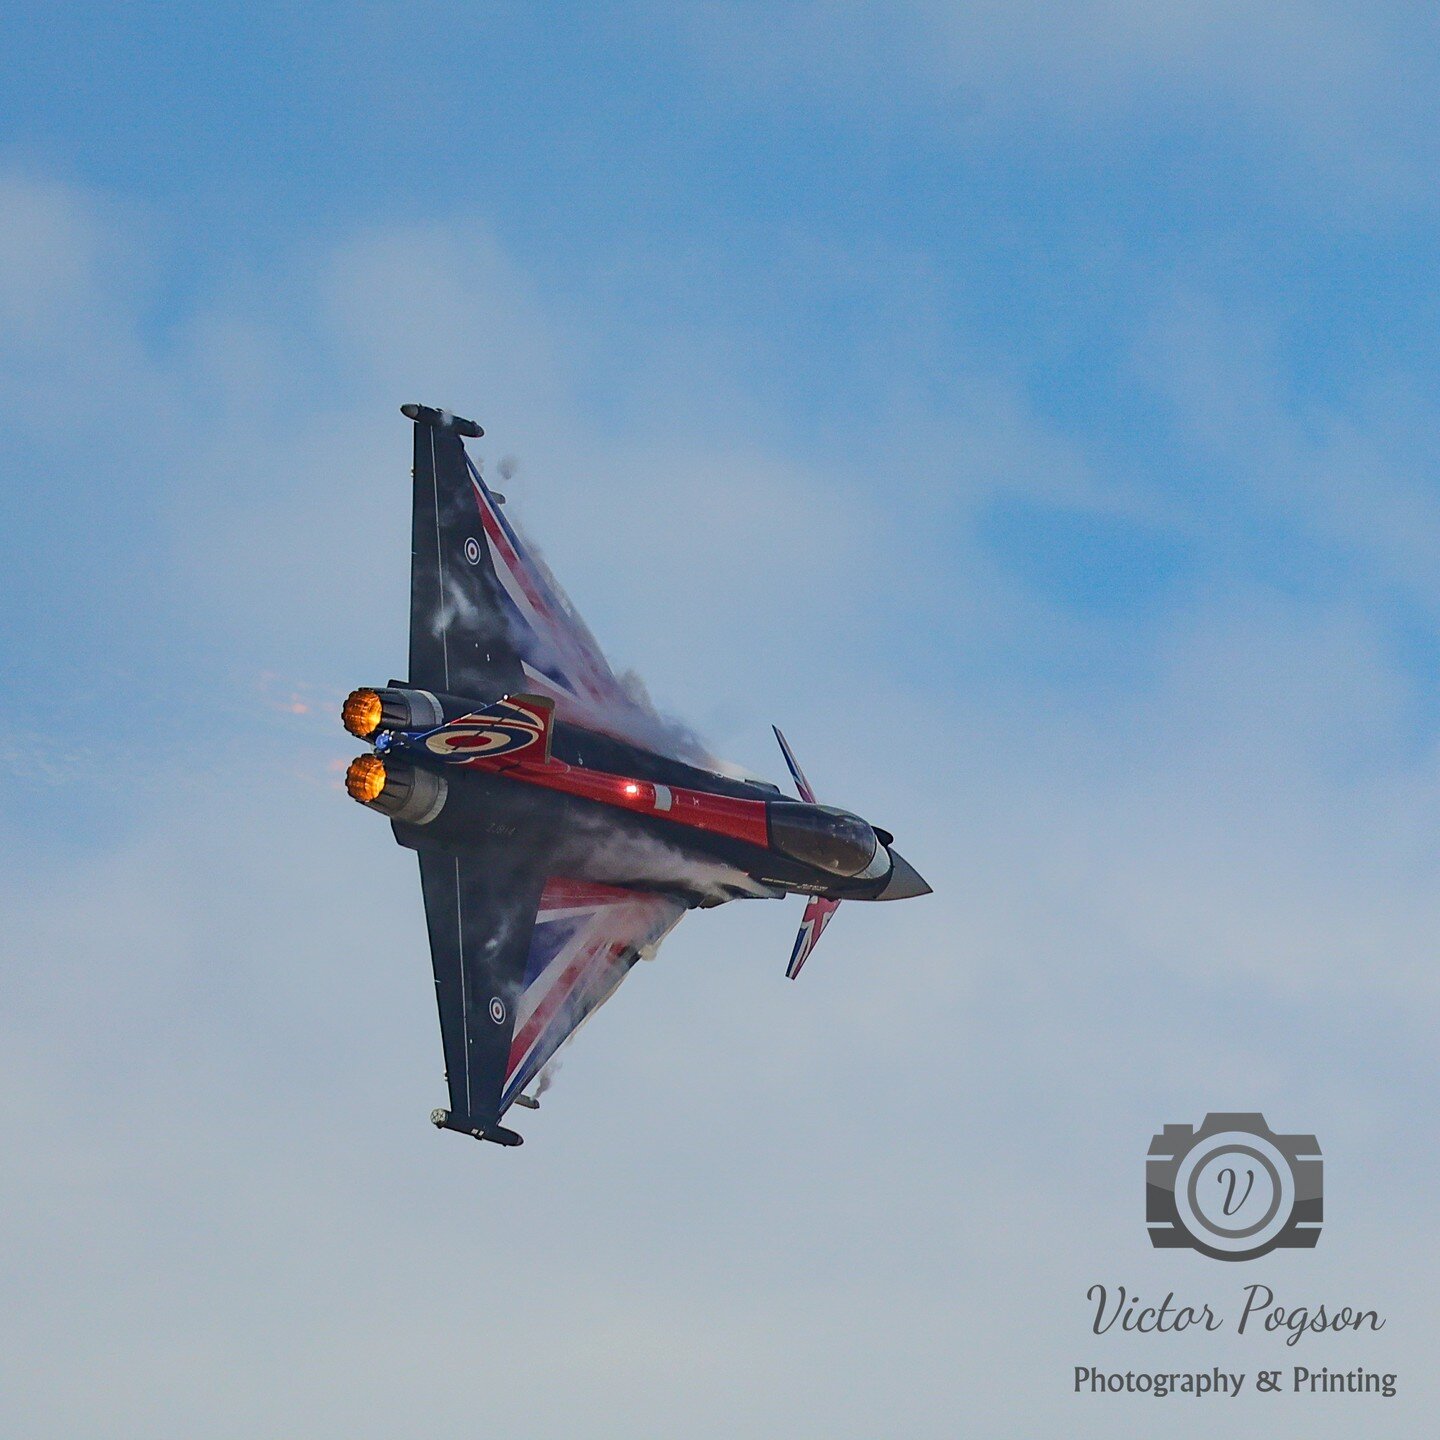 Southport Airshow 2023. Largely disappointing with this noteable exception 😊

#typhoon #eurofighter #eurofightertyphoon #southportairshow2023 #raf #royalairforce #planesofinstagram #ukairshow